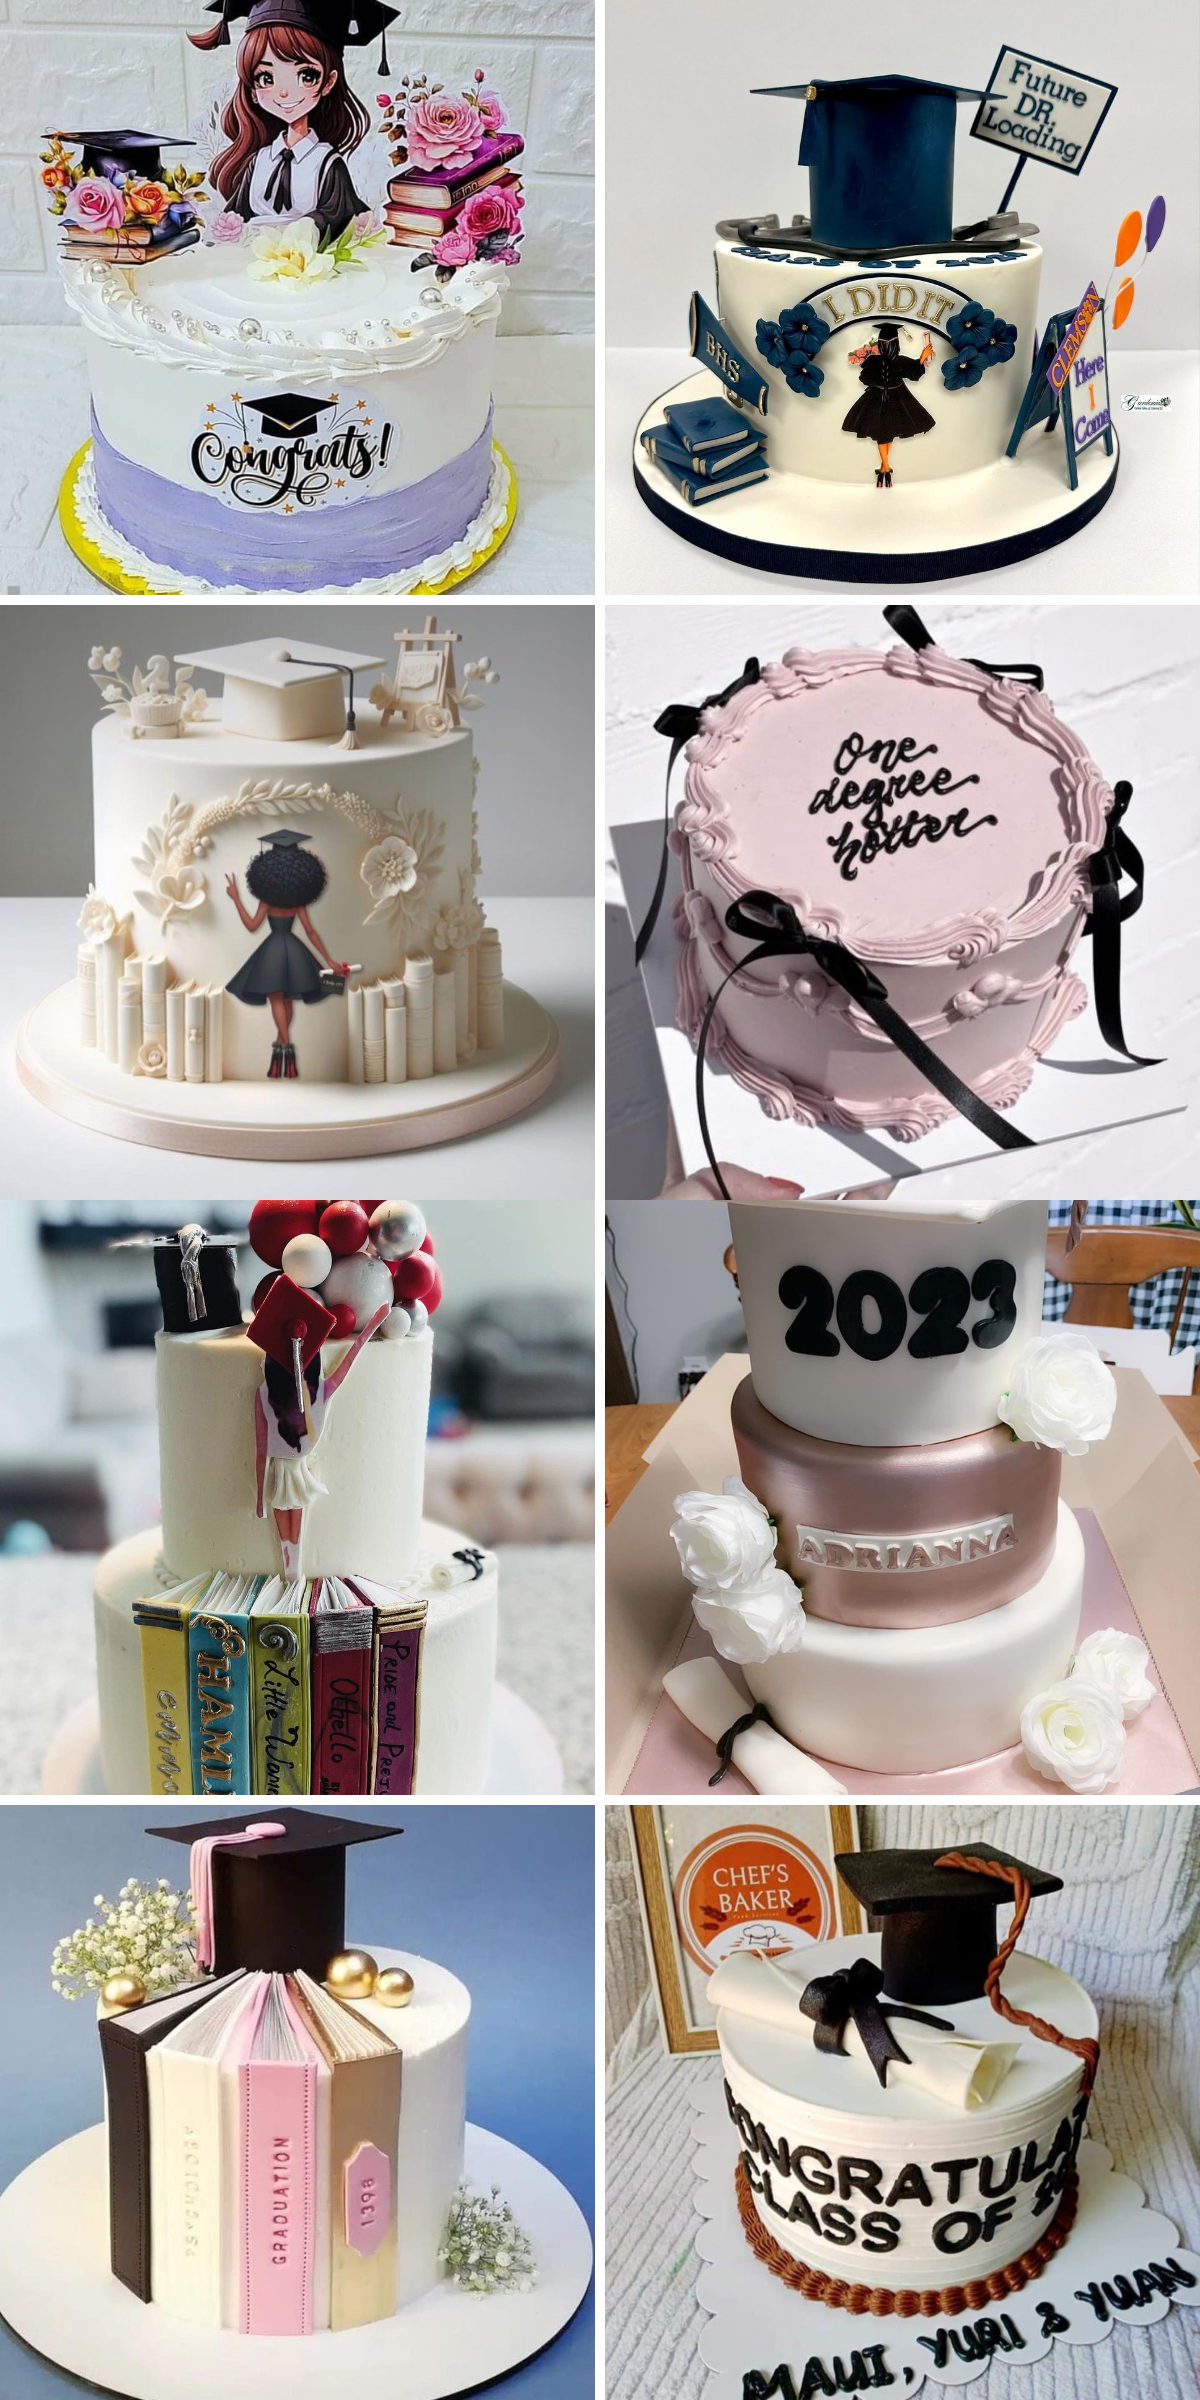 🎓🎉 Find inspiration for graduation cakes that honor the past and look forward to the bright future ahead.